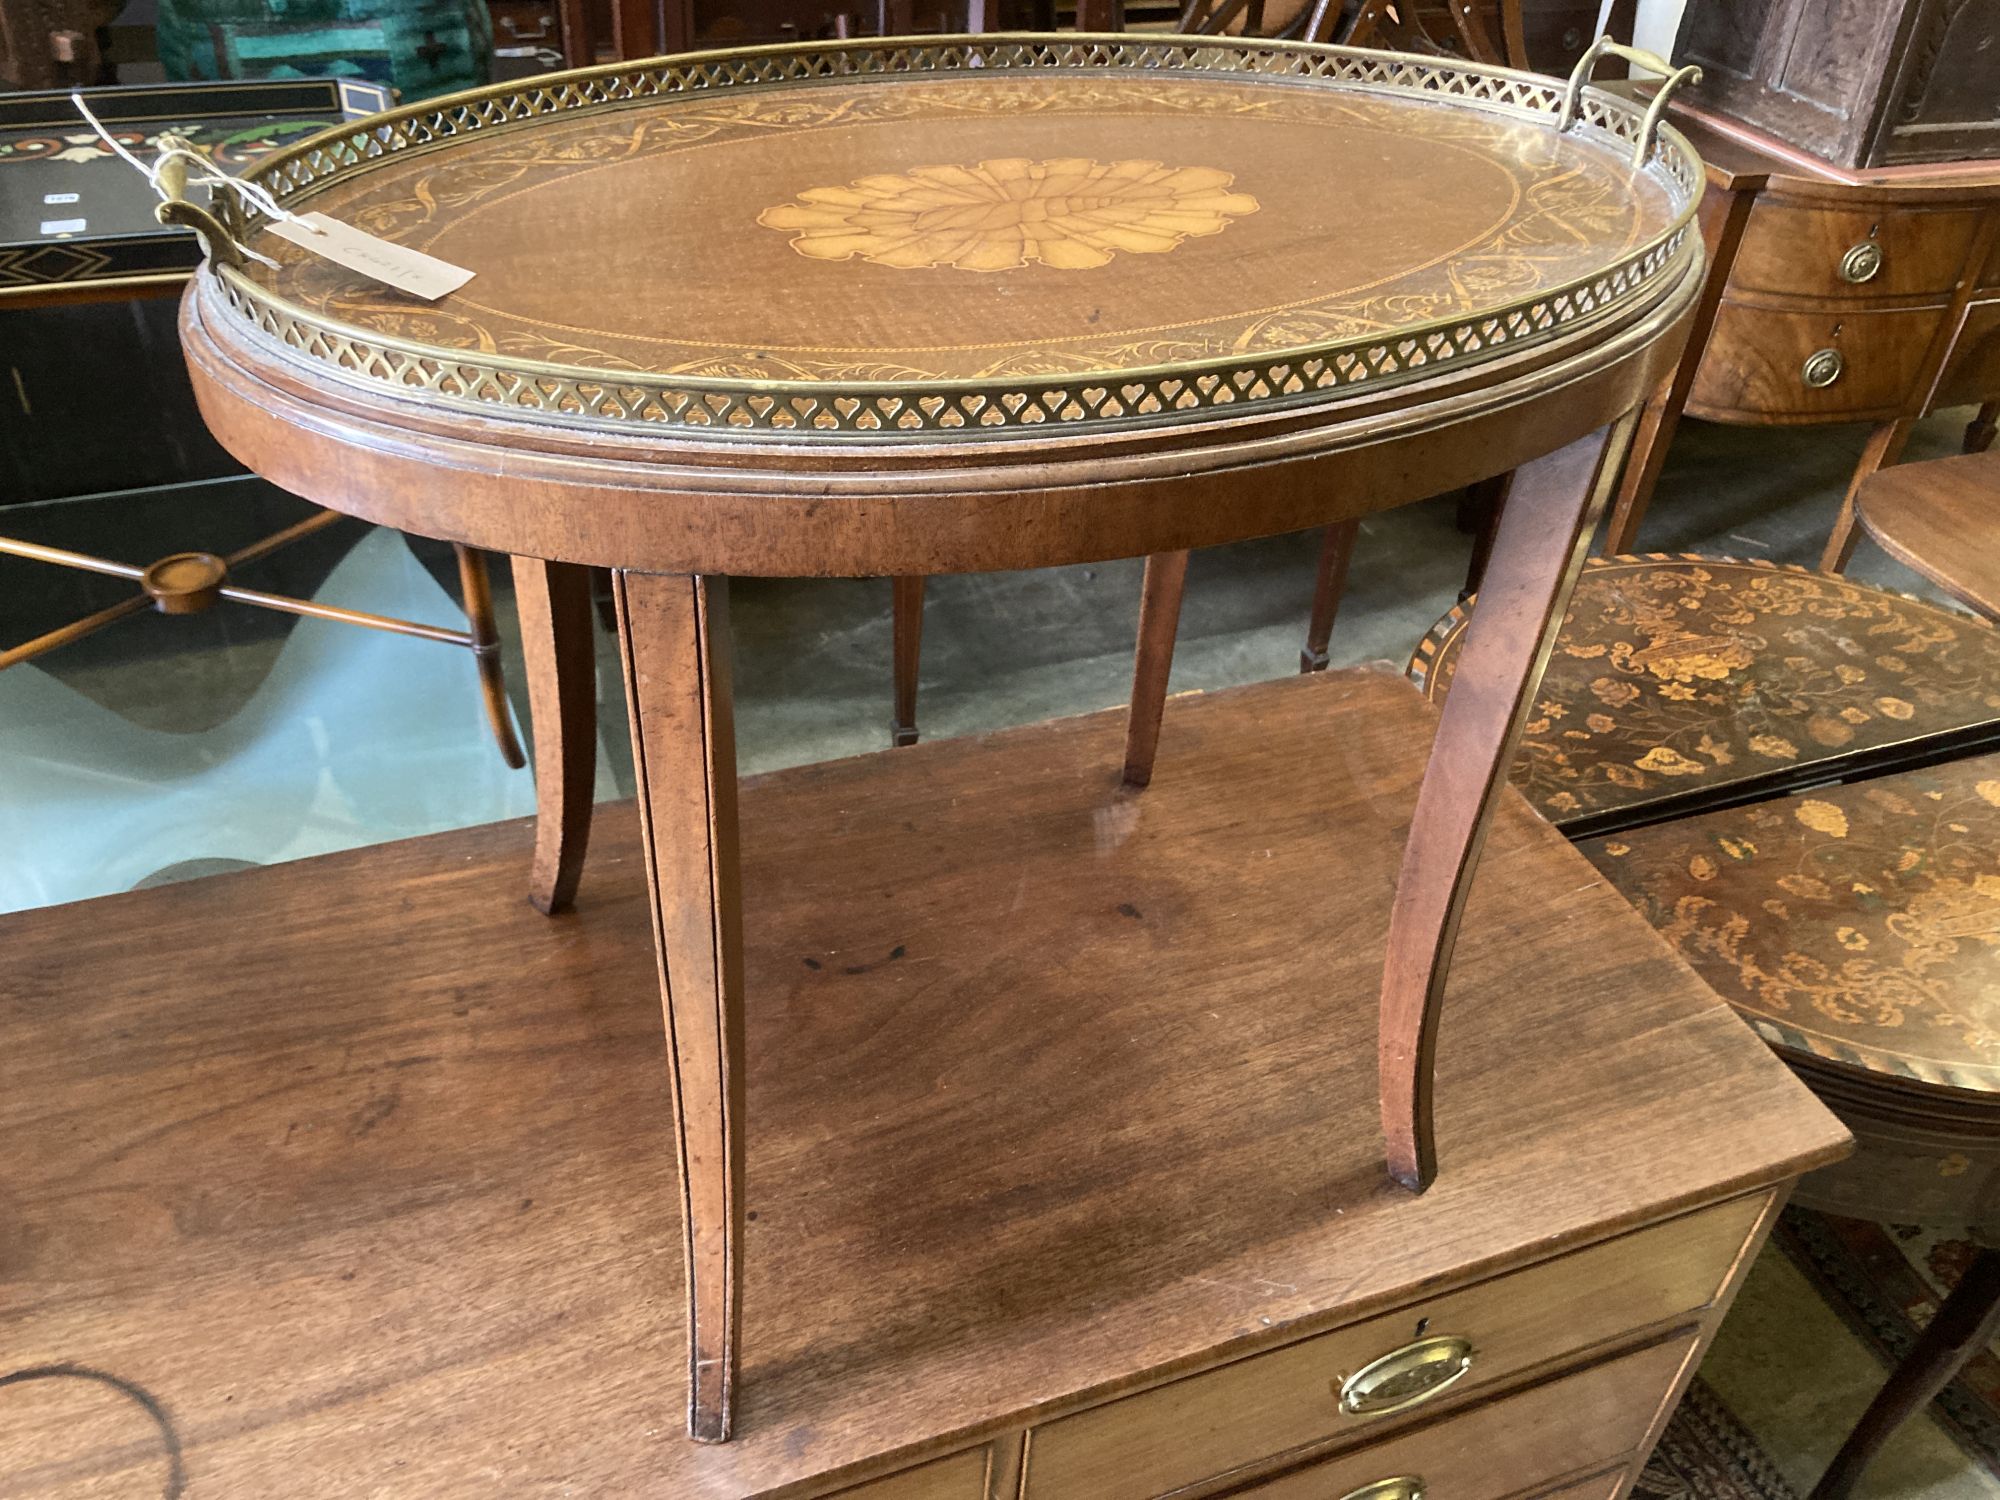 An Edwardian inlaid oval tray, on later stand, width 70cm depth 46cm height 57cm